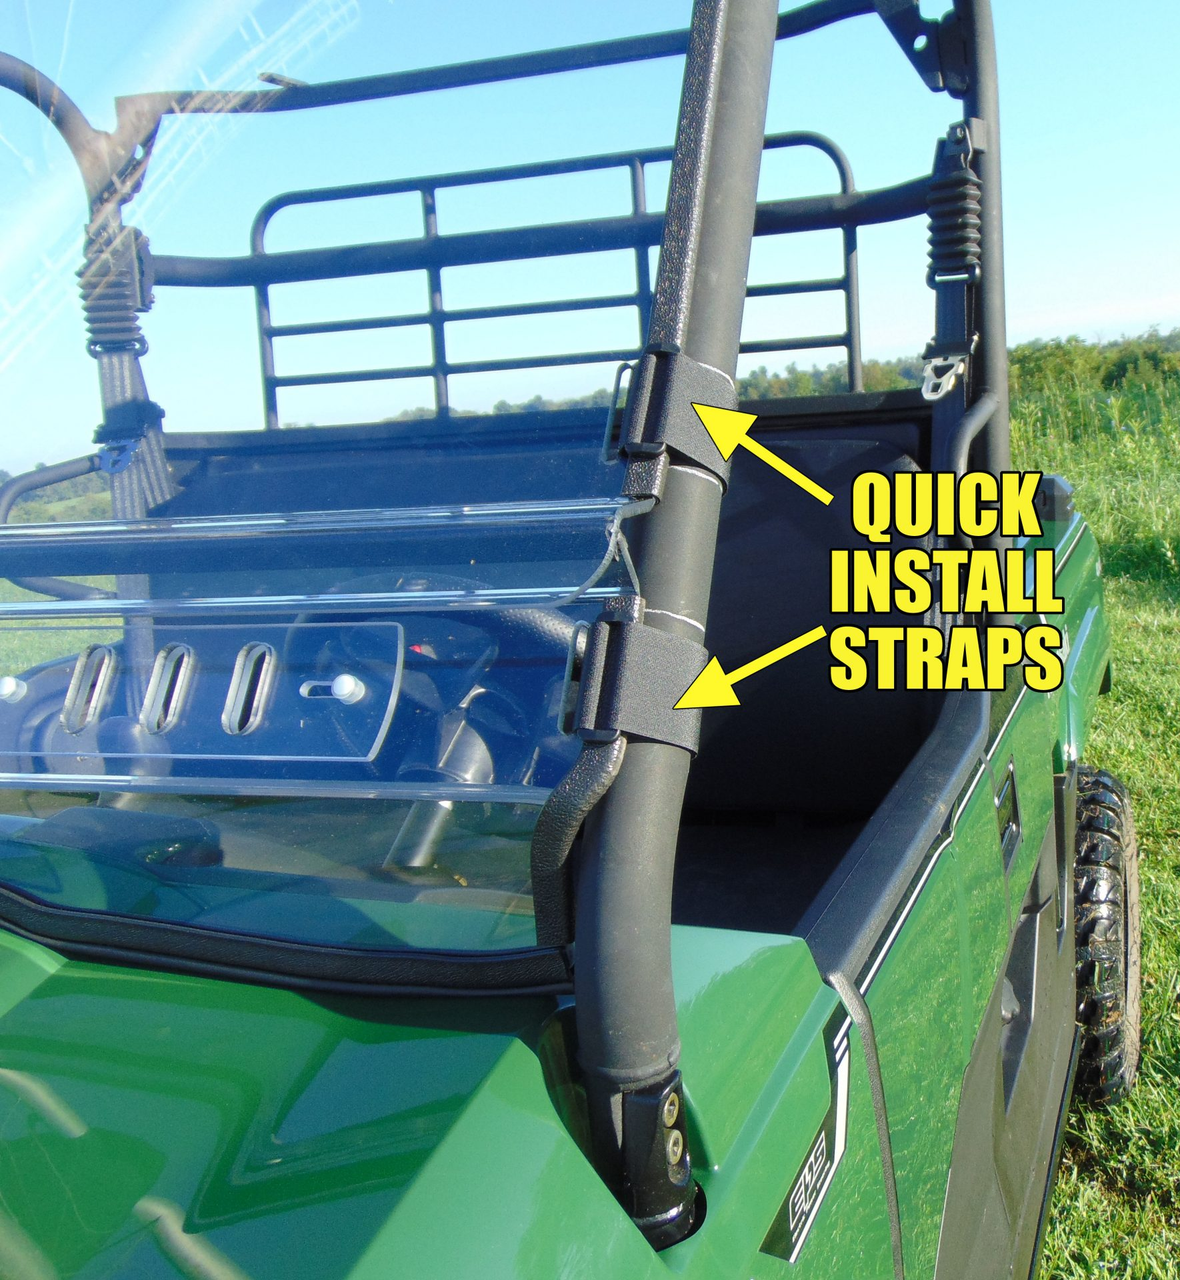 3 Star side x side accessories Polaris RZR 4 900/XP 4 1000/XP 4 Turbo 1-Pc Scratch-Resistant Windshield quick install straps